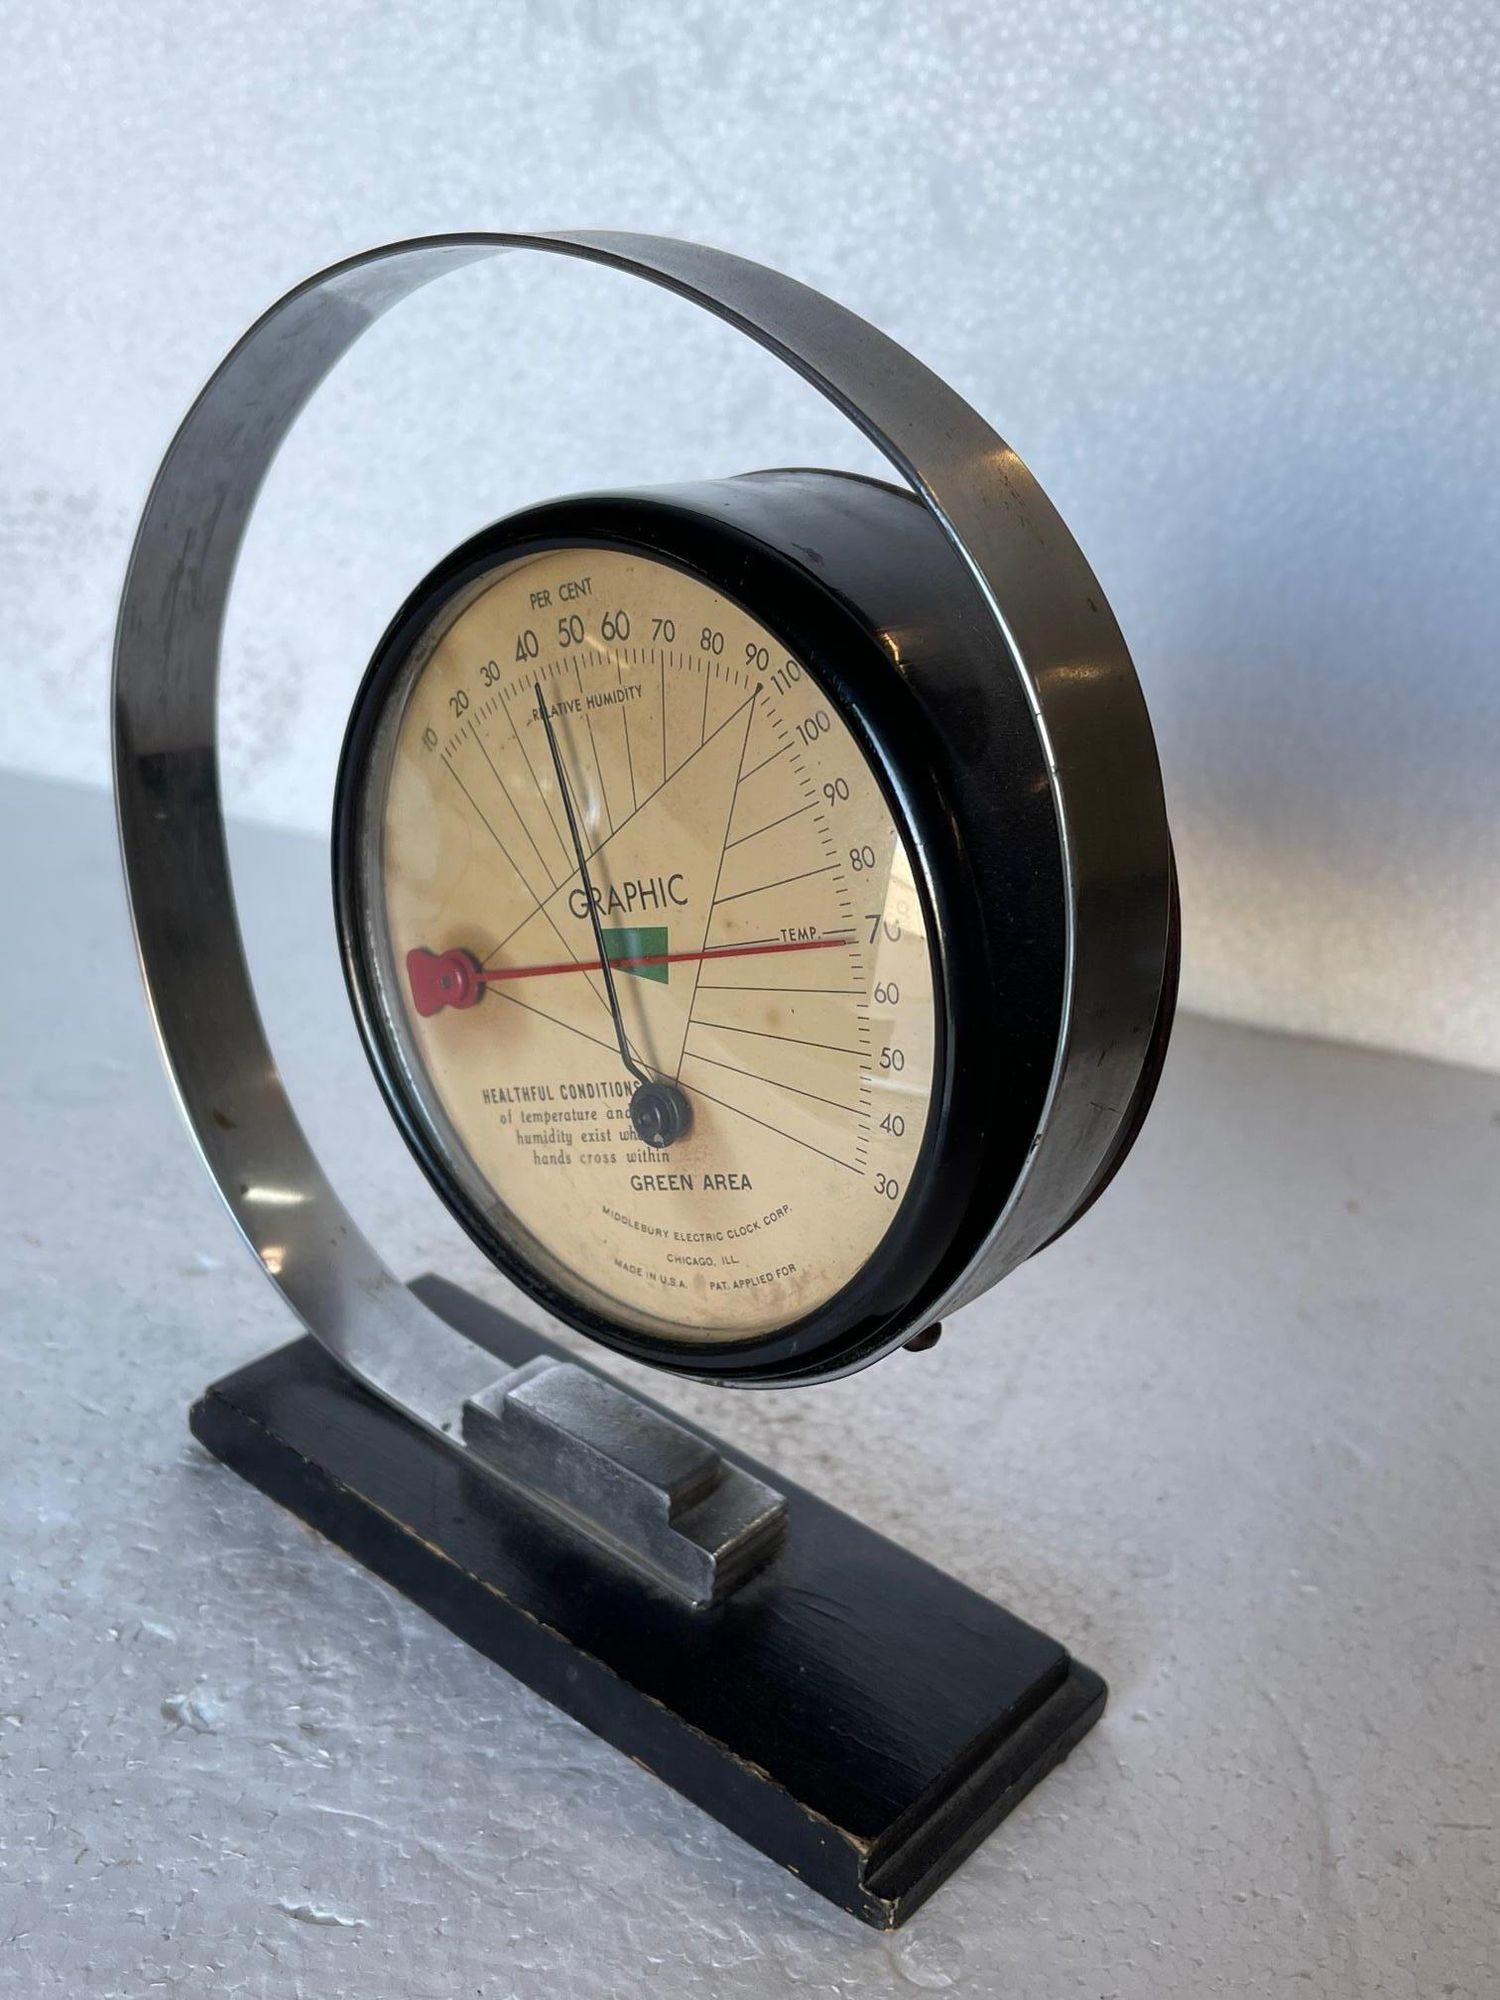 Streamline Art Deco temperature and humidity monitor by Middlebury. featuring a temperature and humidity monitor fitted in a circular housing fixed a scrolling chromed spring arm on a black metal square base.

United States, 1930